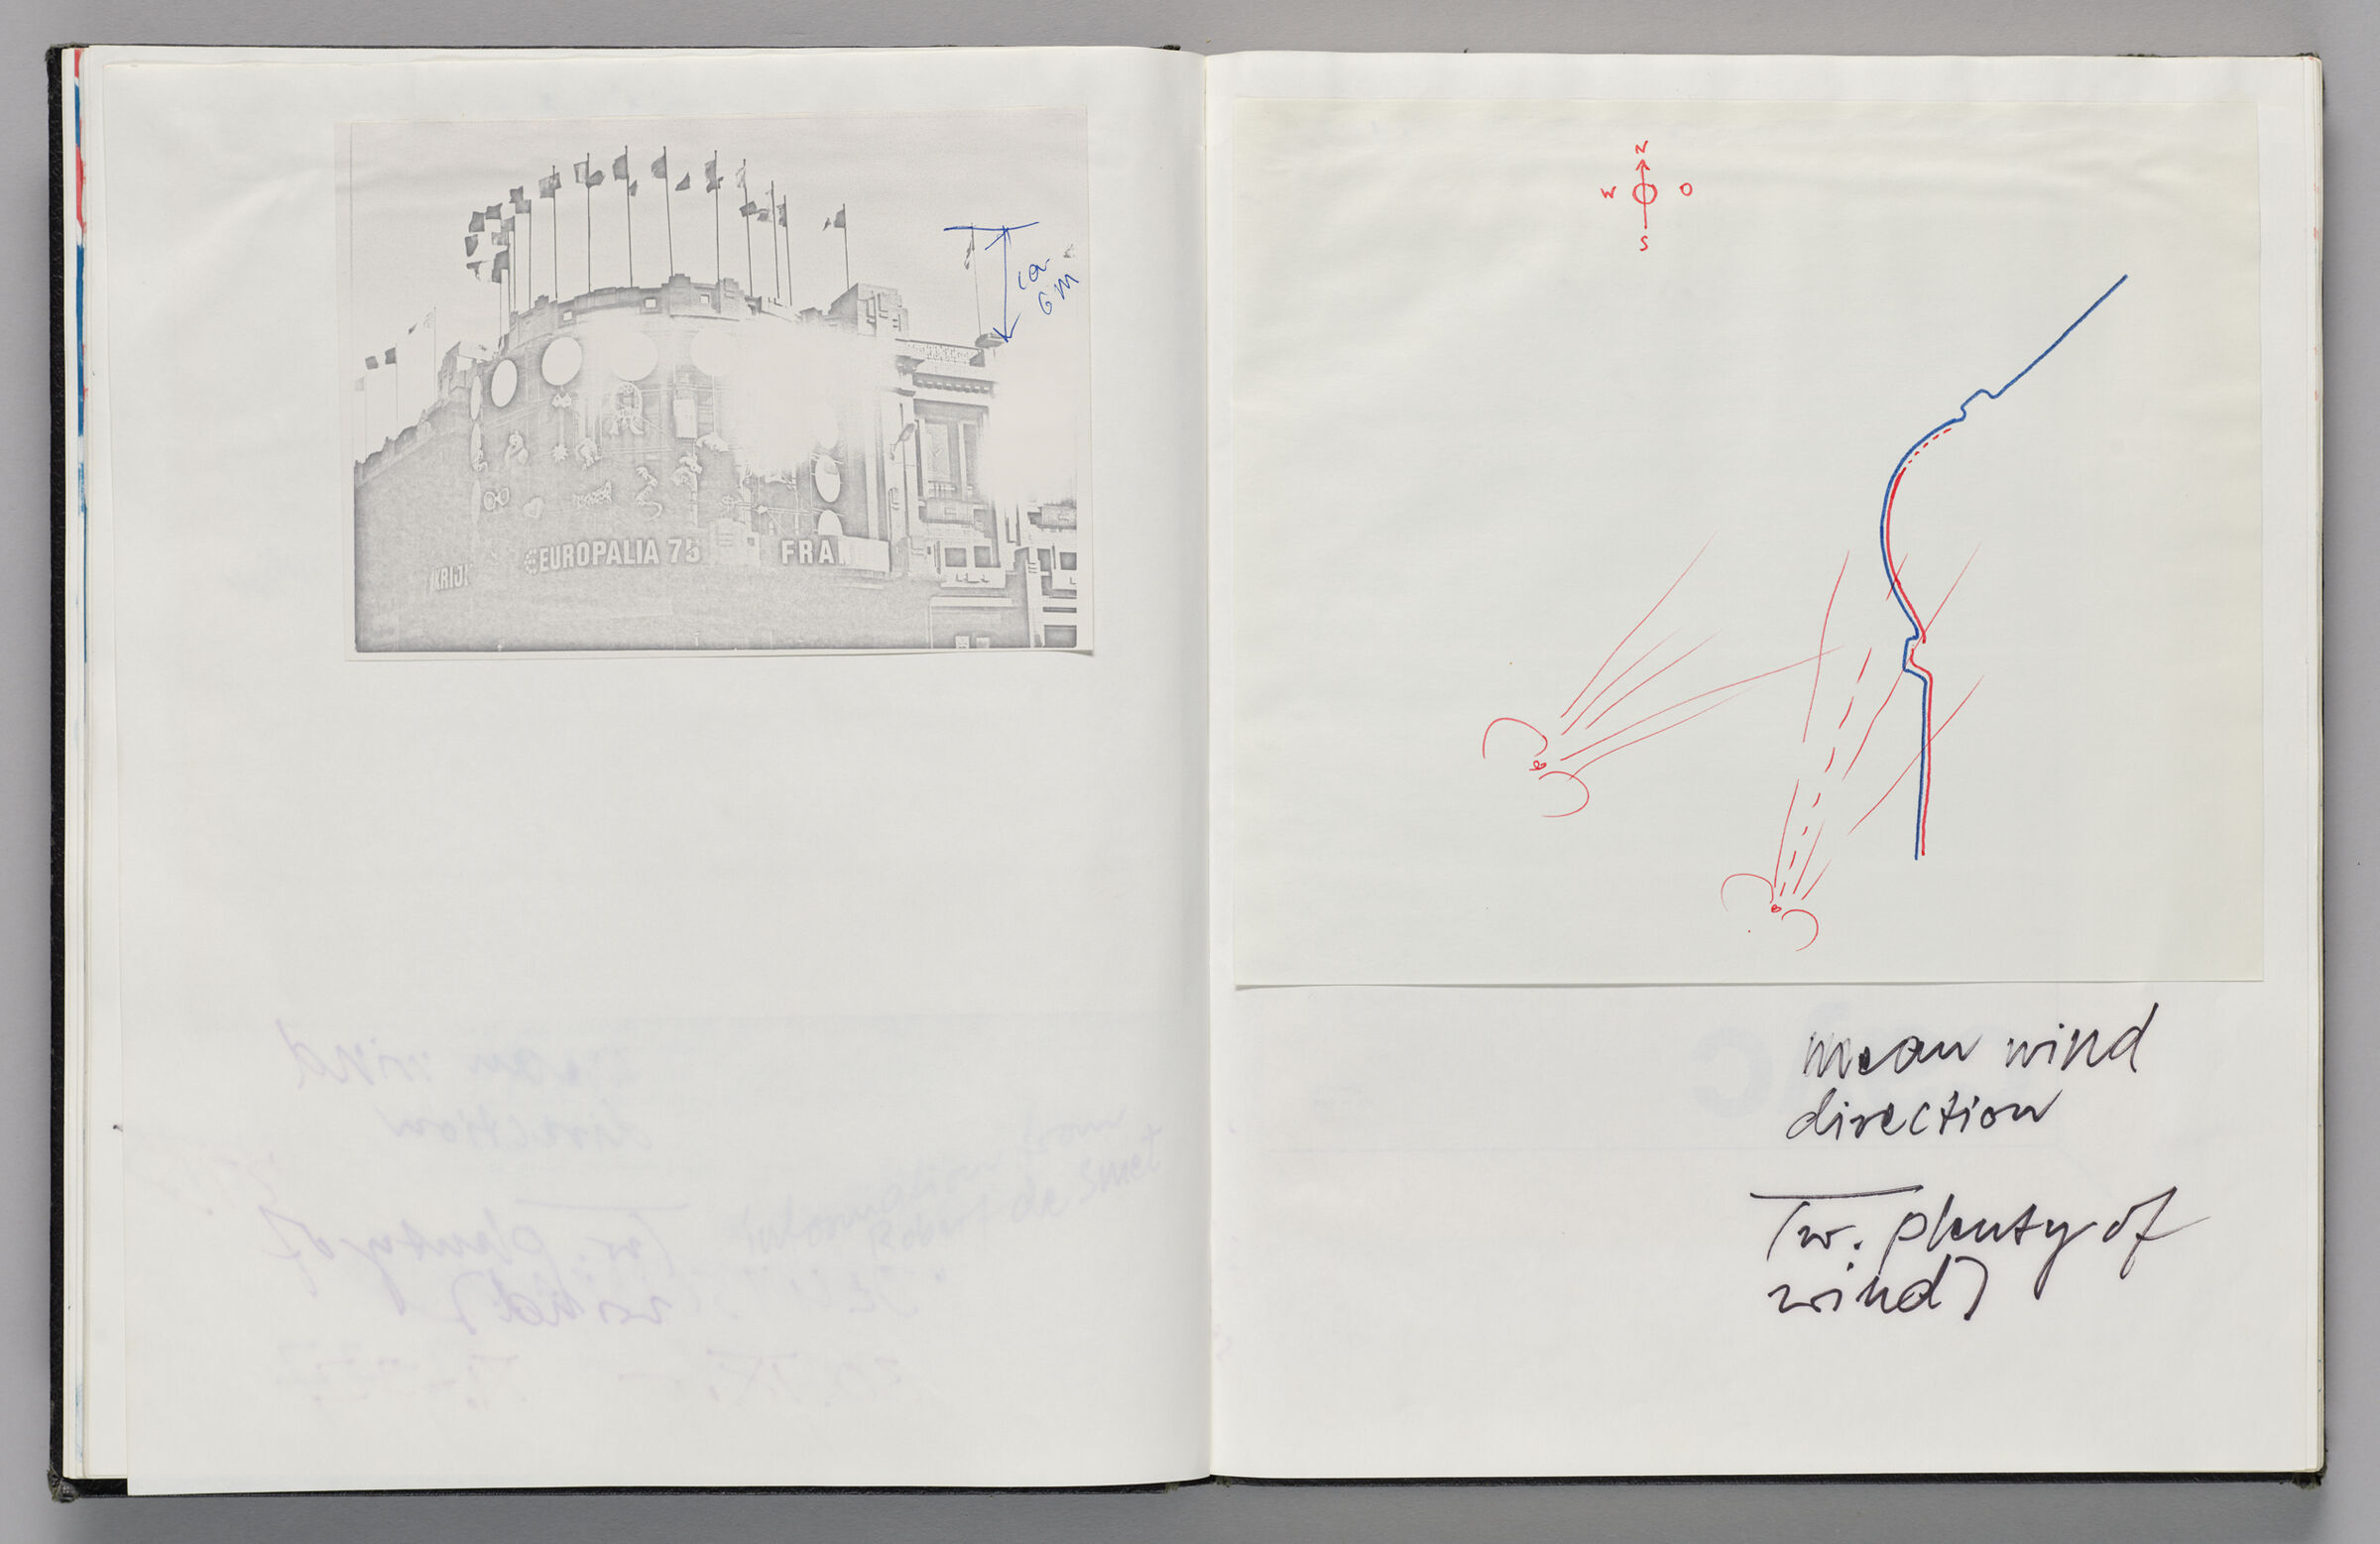 Untitled (Pasted Photocopy Of Façade With Measurements, Left Page); Untitled (Pasted Sketch Of Wind Directions, Right Page)